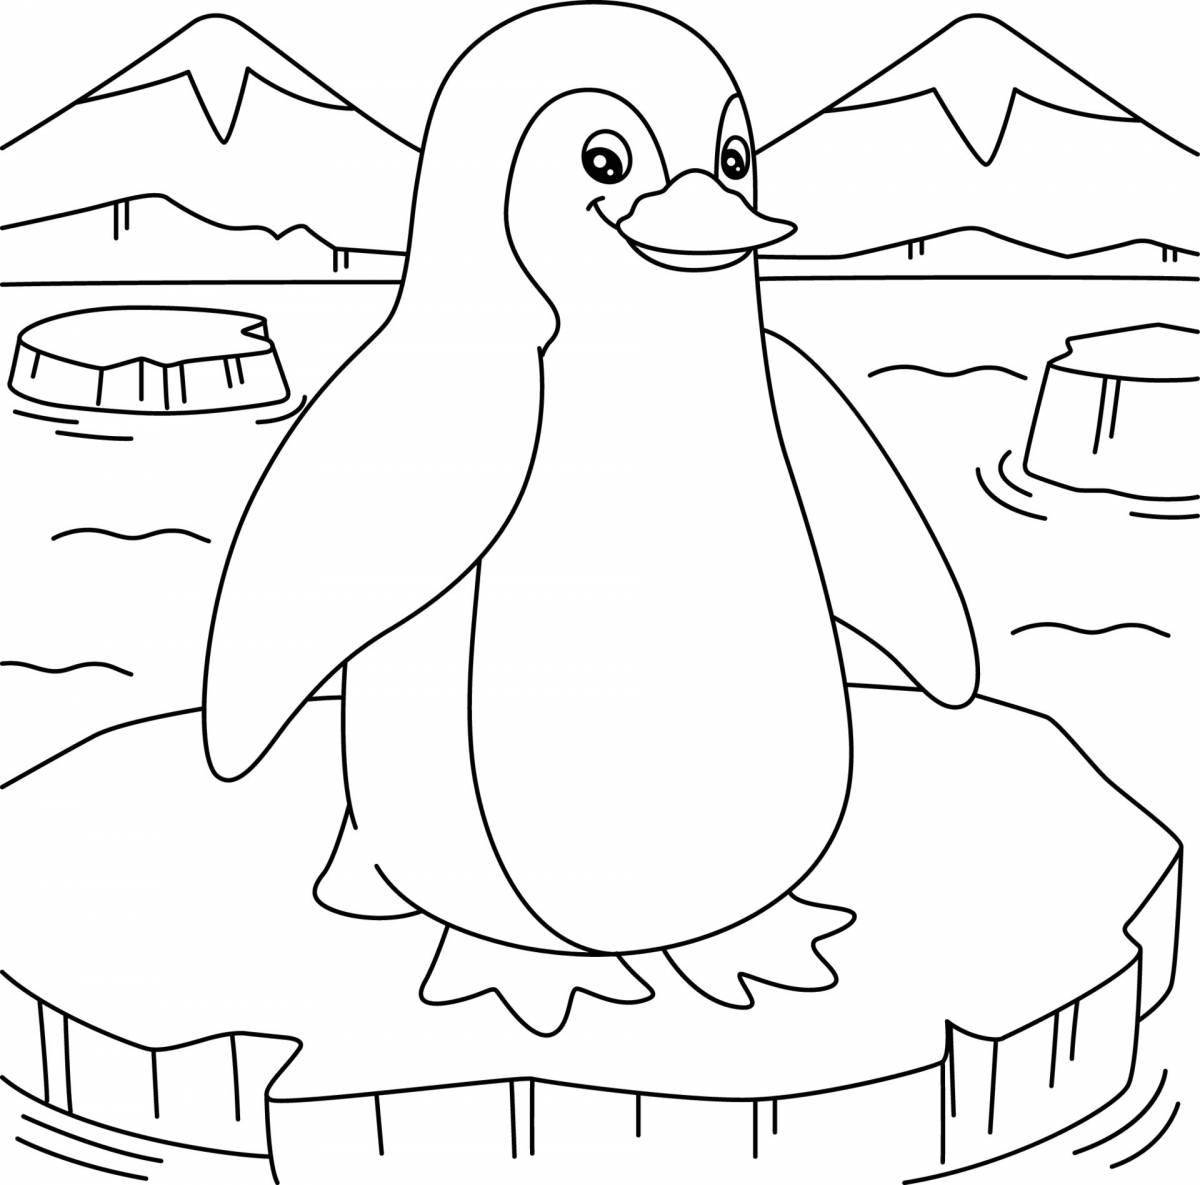 Coloring page playful penguin with ice cream